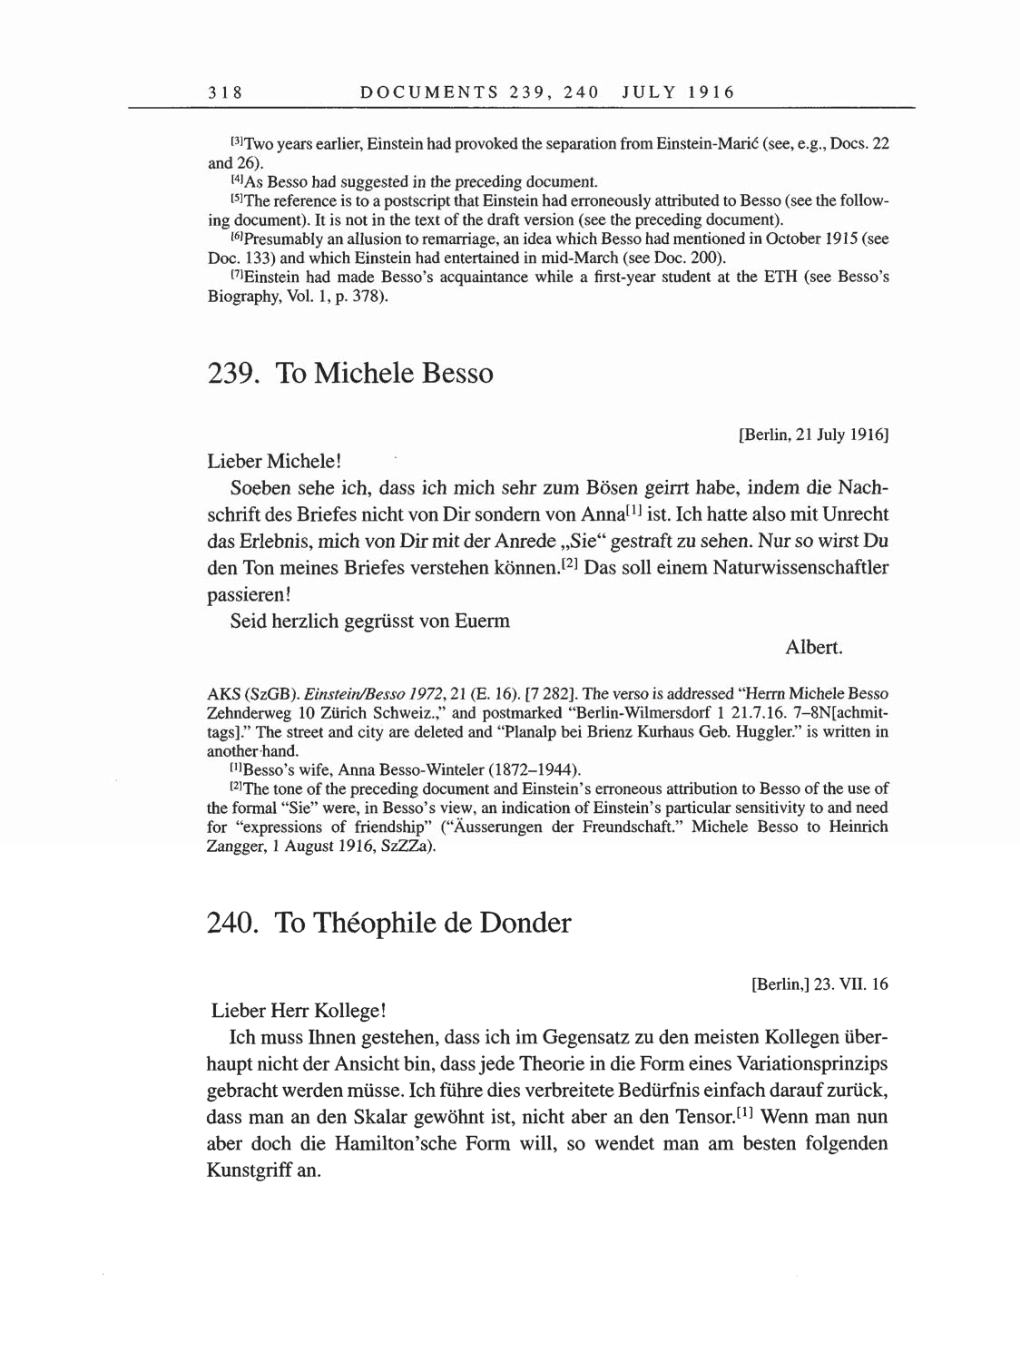 Volume 8, Part A: The Berlin Years: Correspondence 1914-1917 page 318